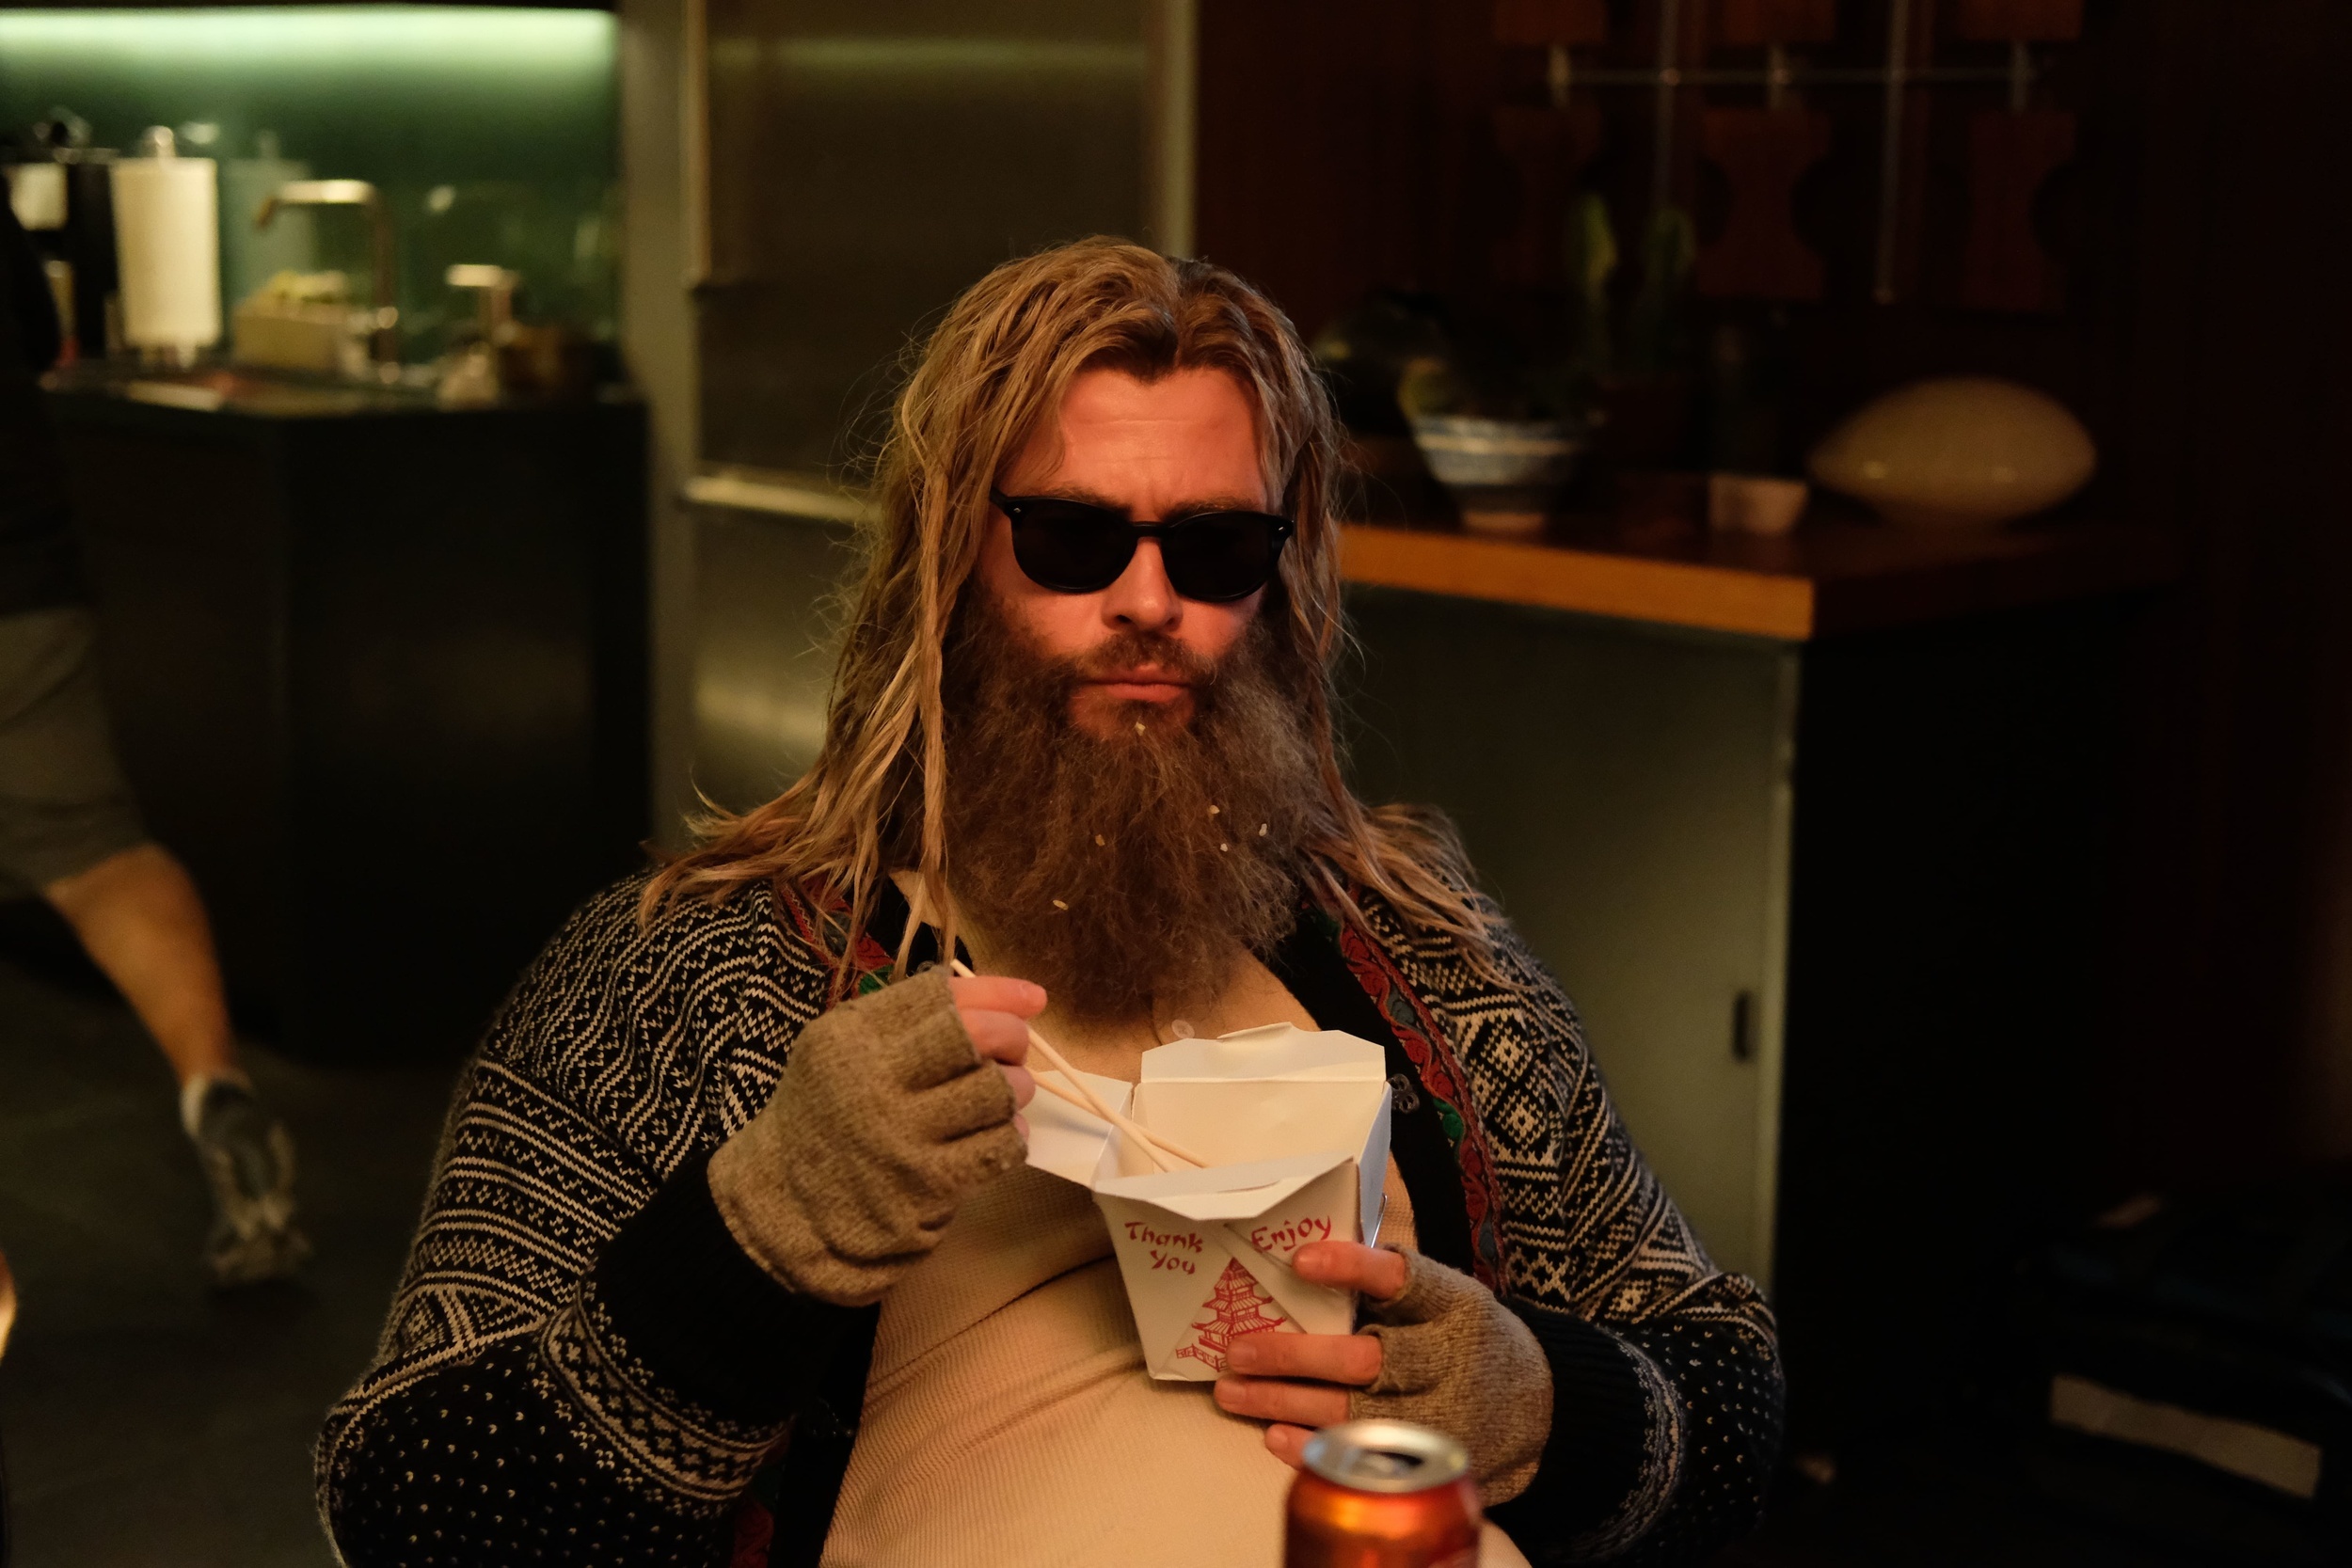 <p>Thor goes through some things after futilely killing Thanos, including, shall we say, not staying in peak physical condition. This was partially Hemsworth’s idea, but the directors made sure it wasn’t just a sight gag but also an indication of Thor’s mental and emotional state. The actor called this version of his character “Lebowski Thor,” which required him to spend three hours in hair and makeup. Thor was going to return to his old self in the middle of the film, but Hemsworth argued not to have him get chiseled again and won that debate.</p><p><a href='https://www.msn.com/en-us/community/channel/vid-cj9pqbr0vn9in2b6ddcd8sfgpfq6x6utp44fssrv6mc2gtybw0us'>Follow us on MSN to see more of our exclusive entertainment content.</a></p>